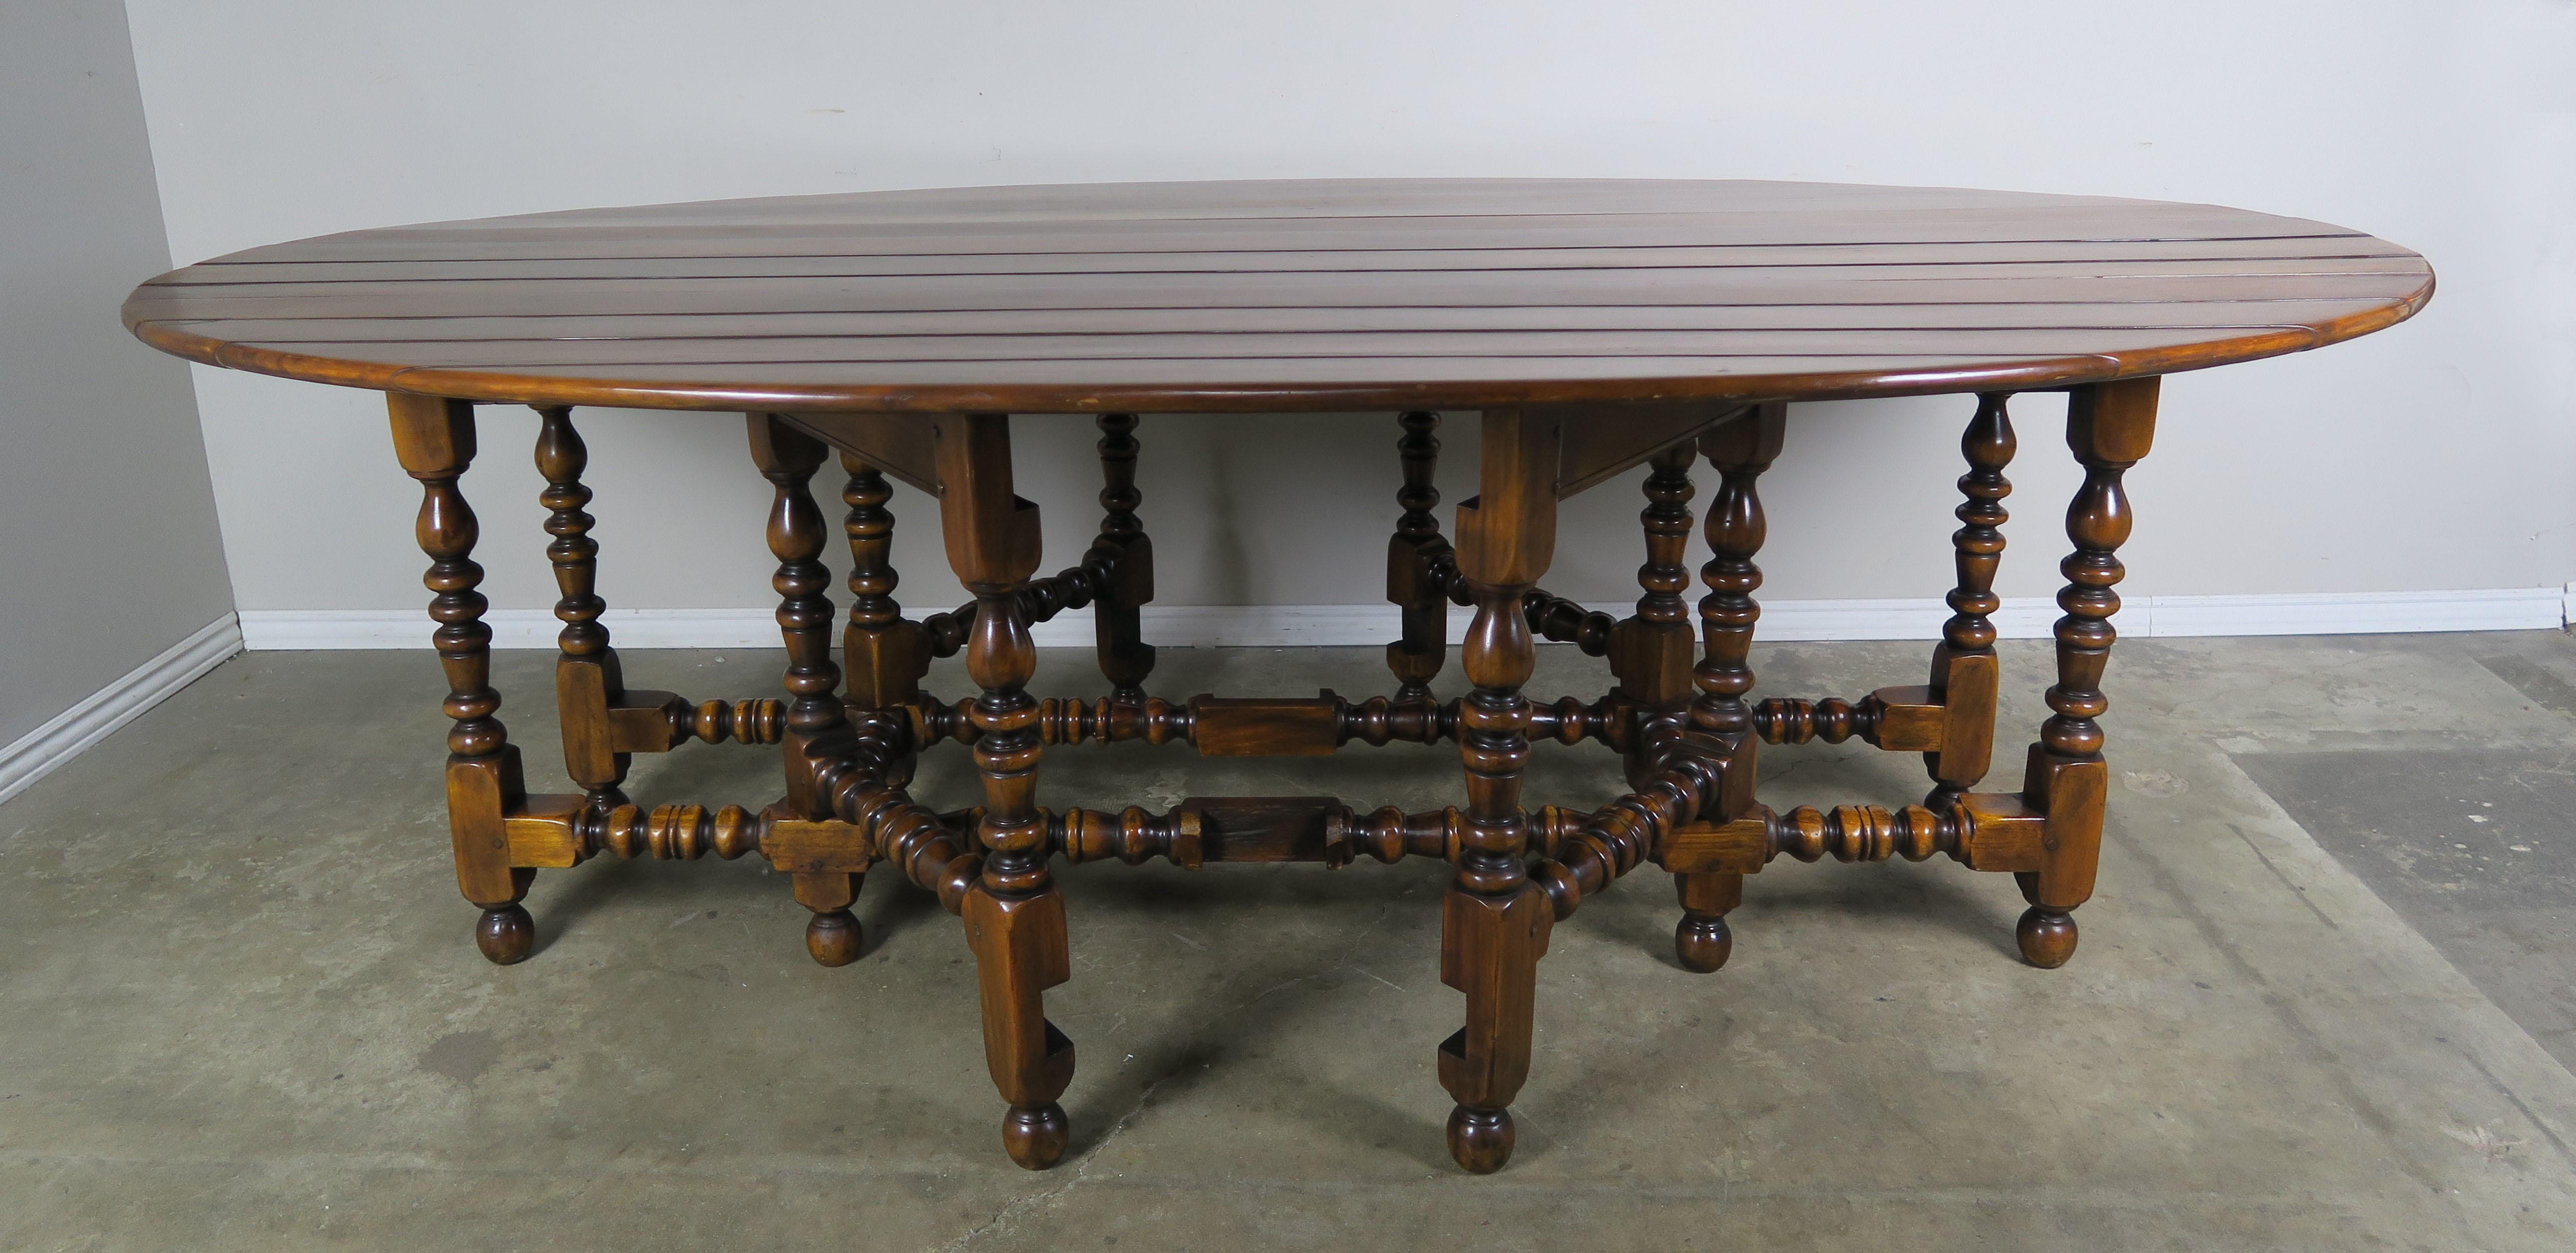 Mid-20th century English walnut gate-leg drop-leaf table with beautifully turned legs. The large dining table can be dropped down to only 19.5